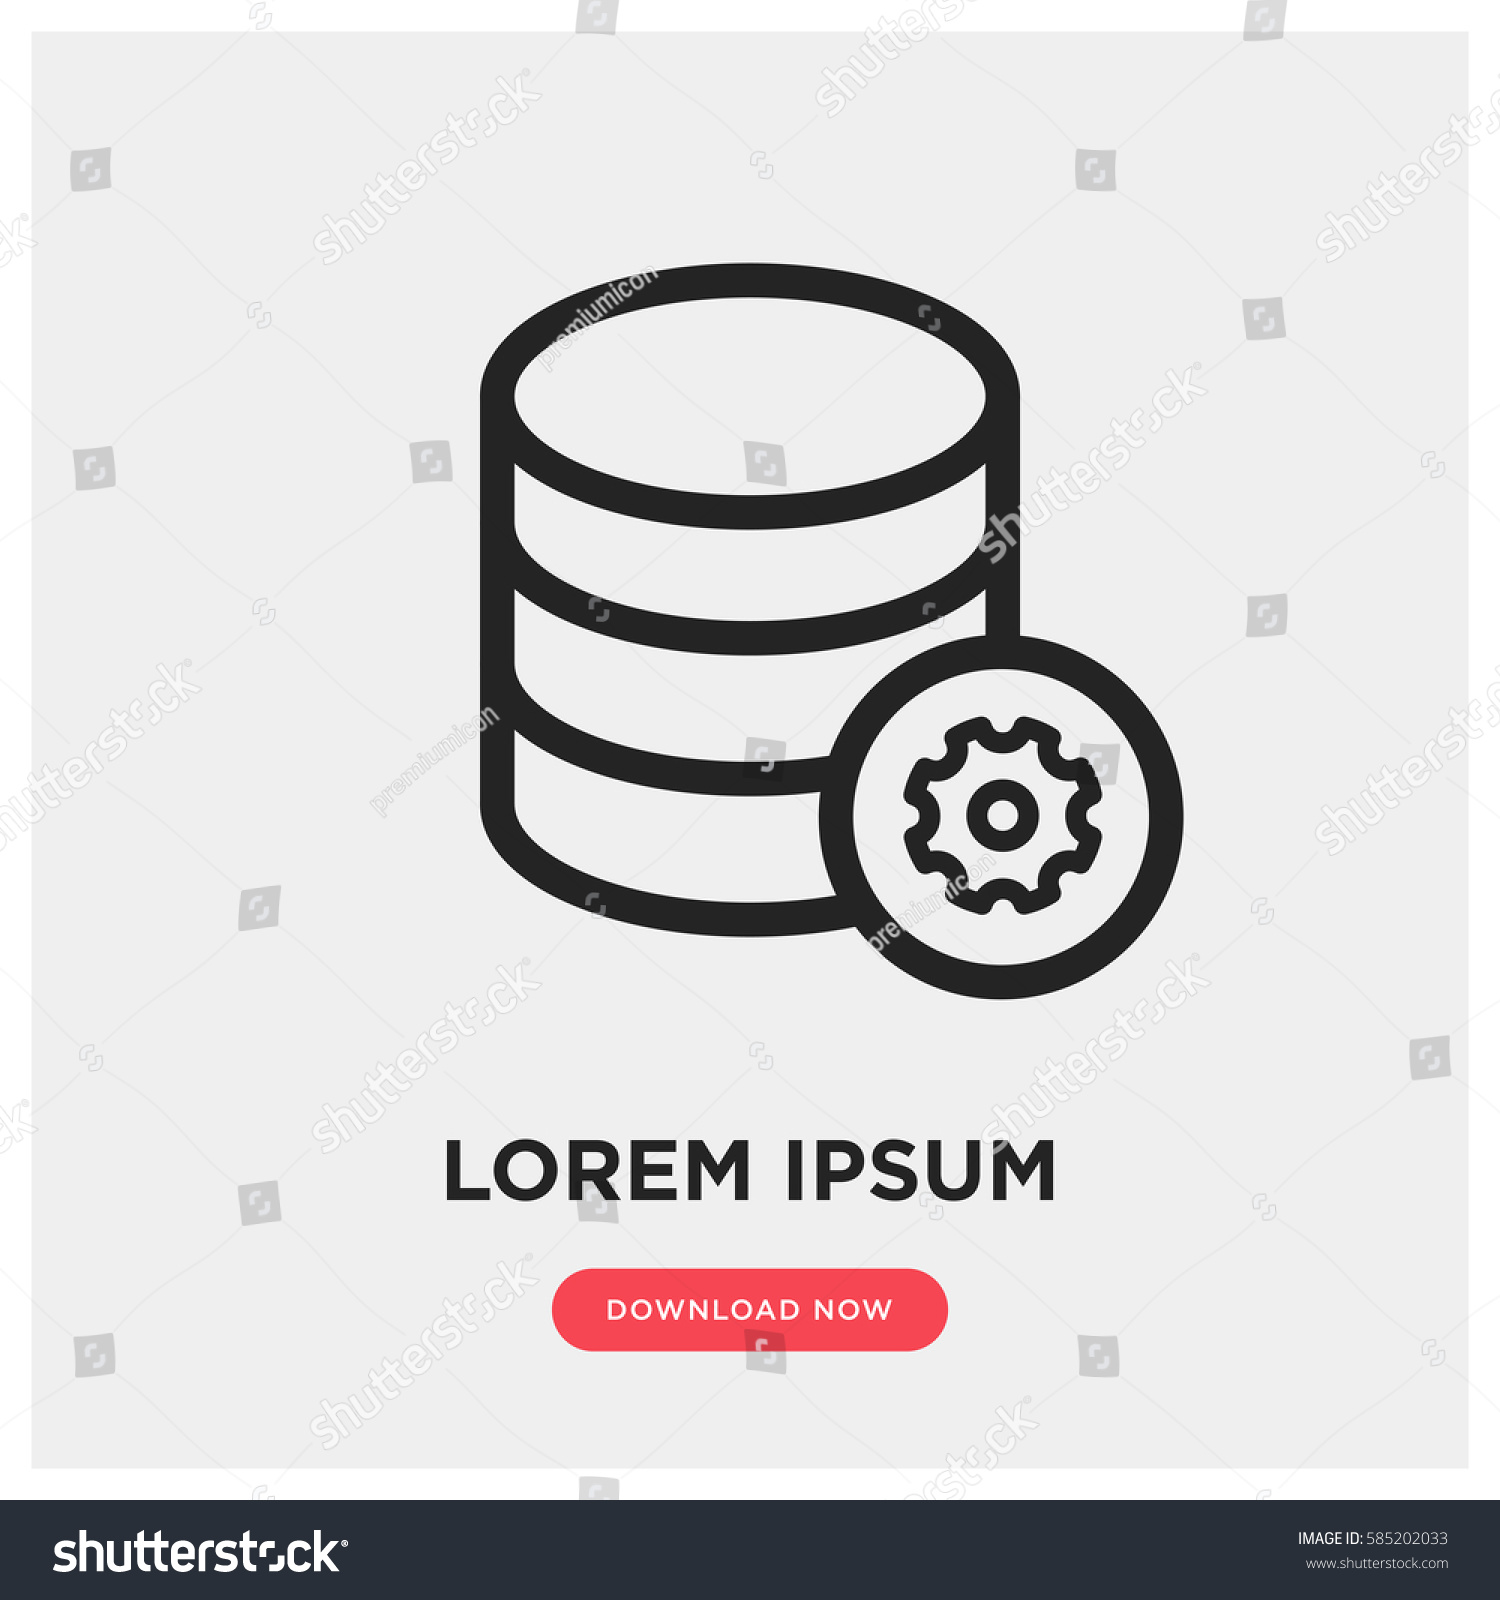 Cloud round icons - Vector stencils library